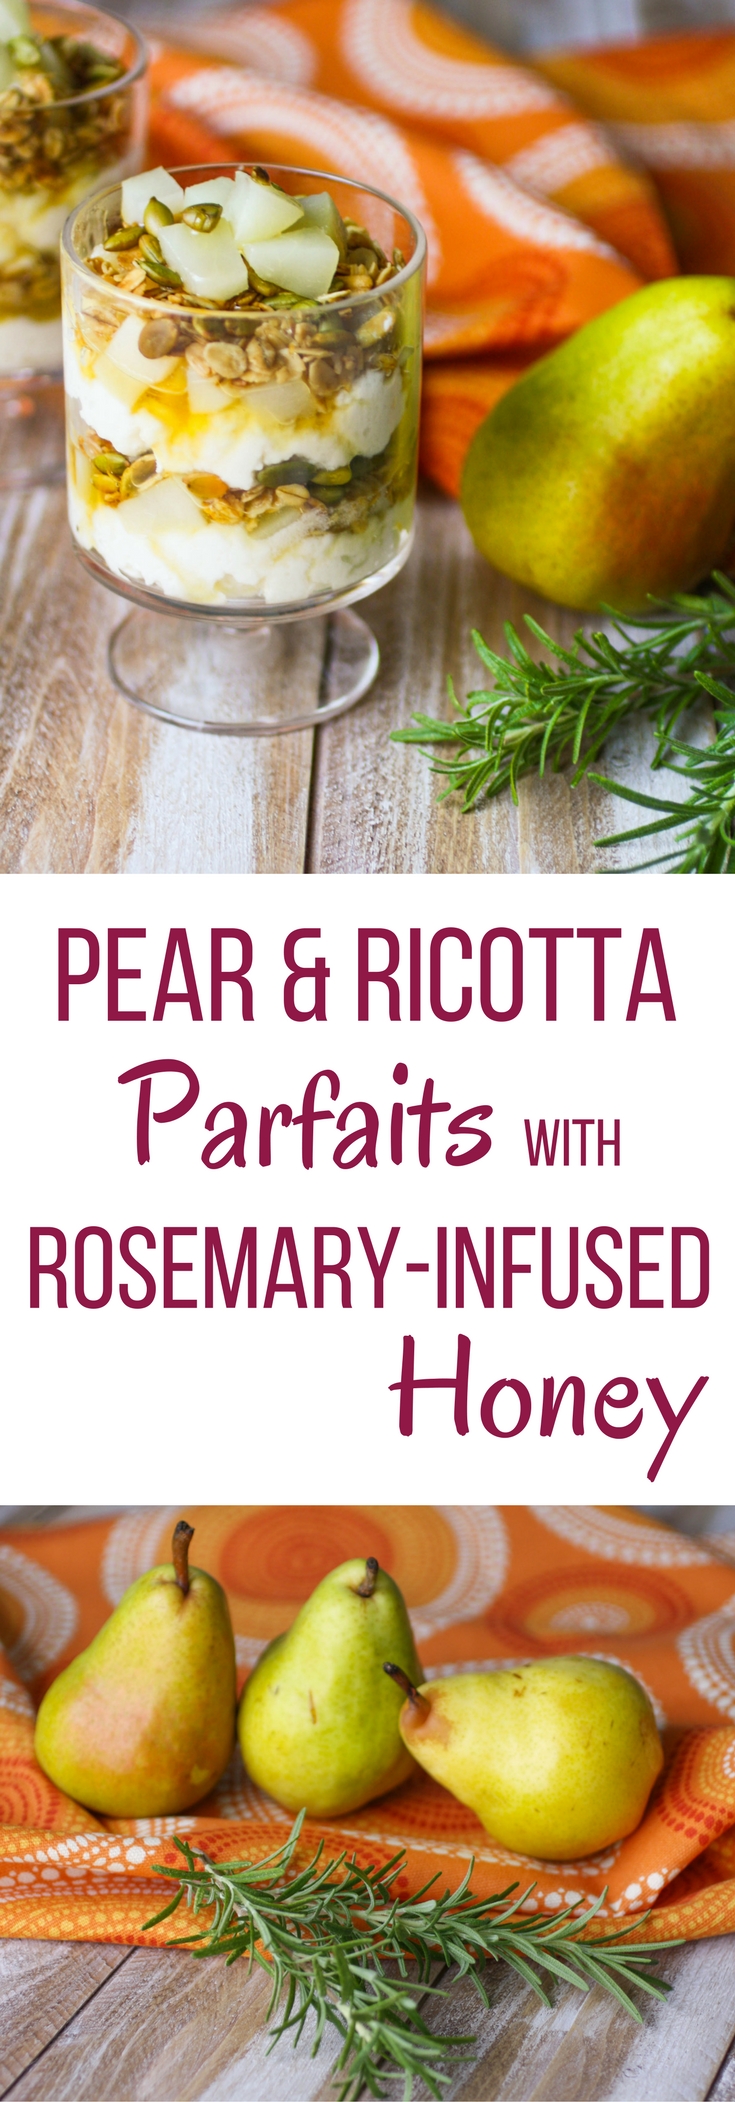 Pear and Ricotta Parfaits with Rosemary-Infused Honey are real treats in the a.m. or p.m.! These pear parfaits are delicious for breakfast or dessert!